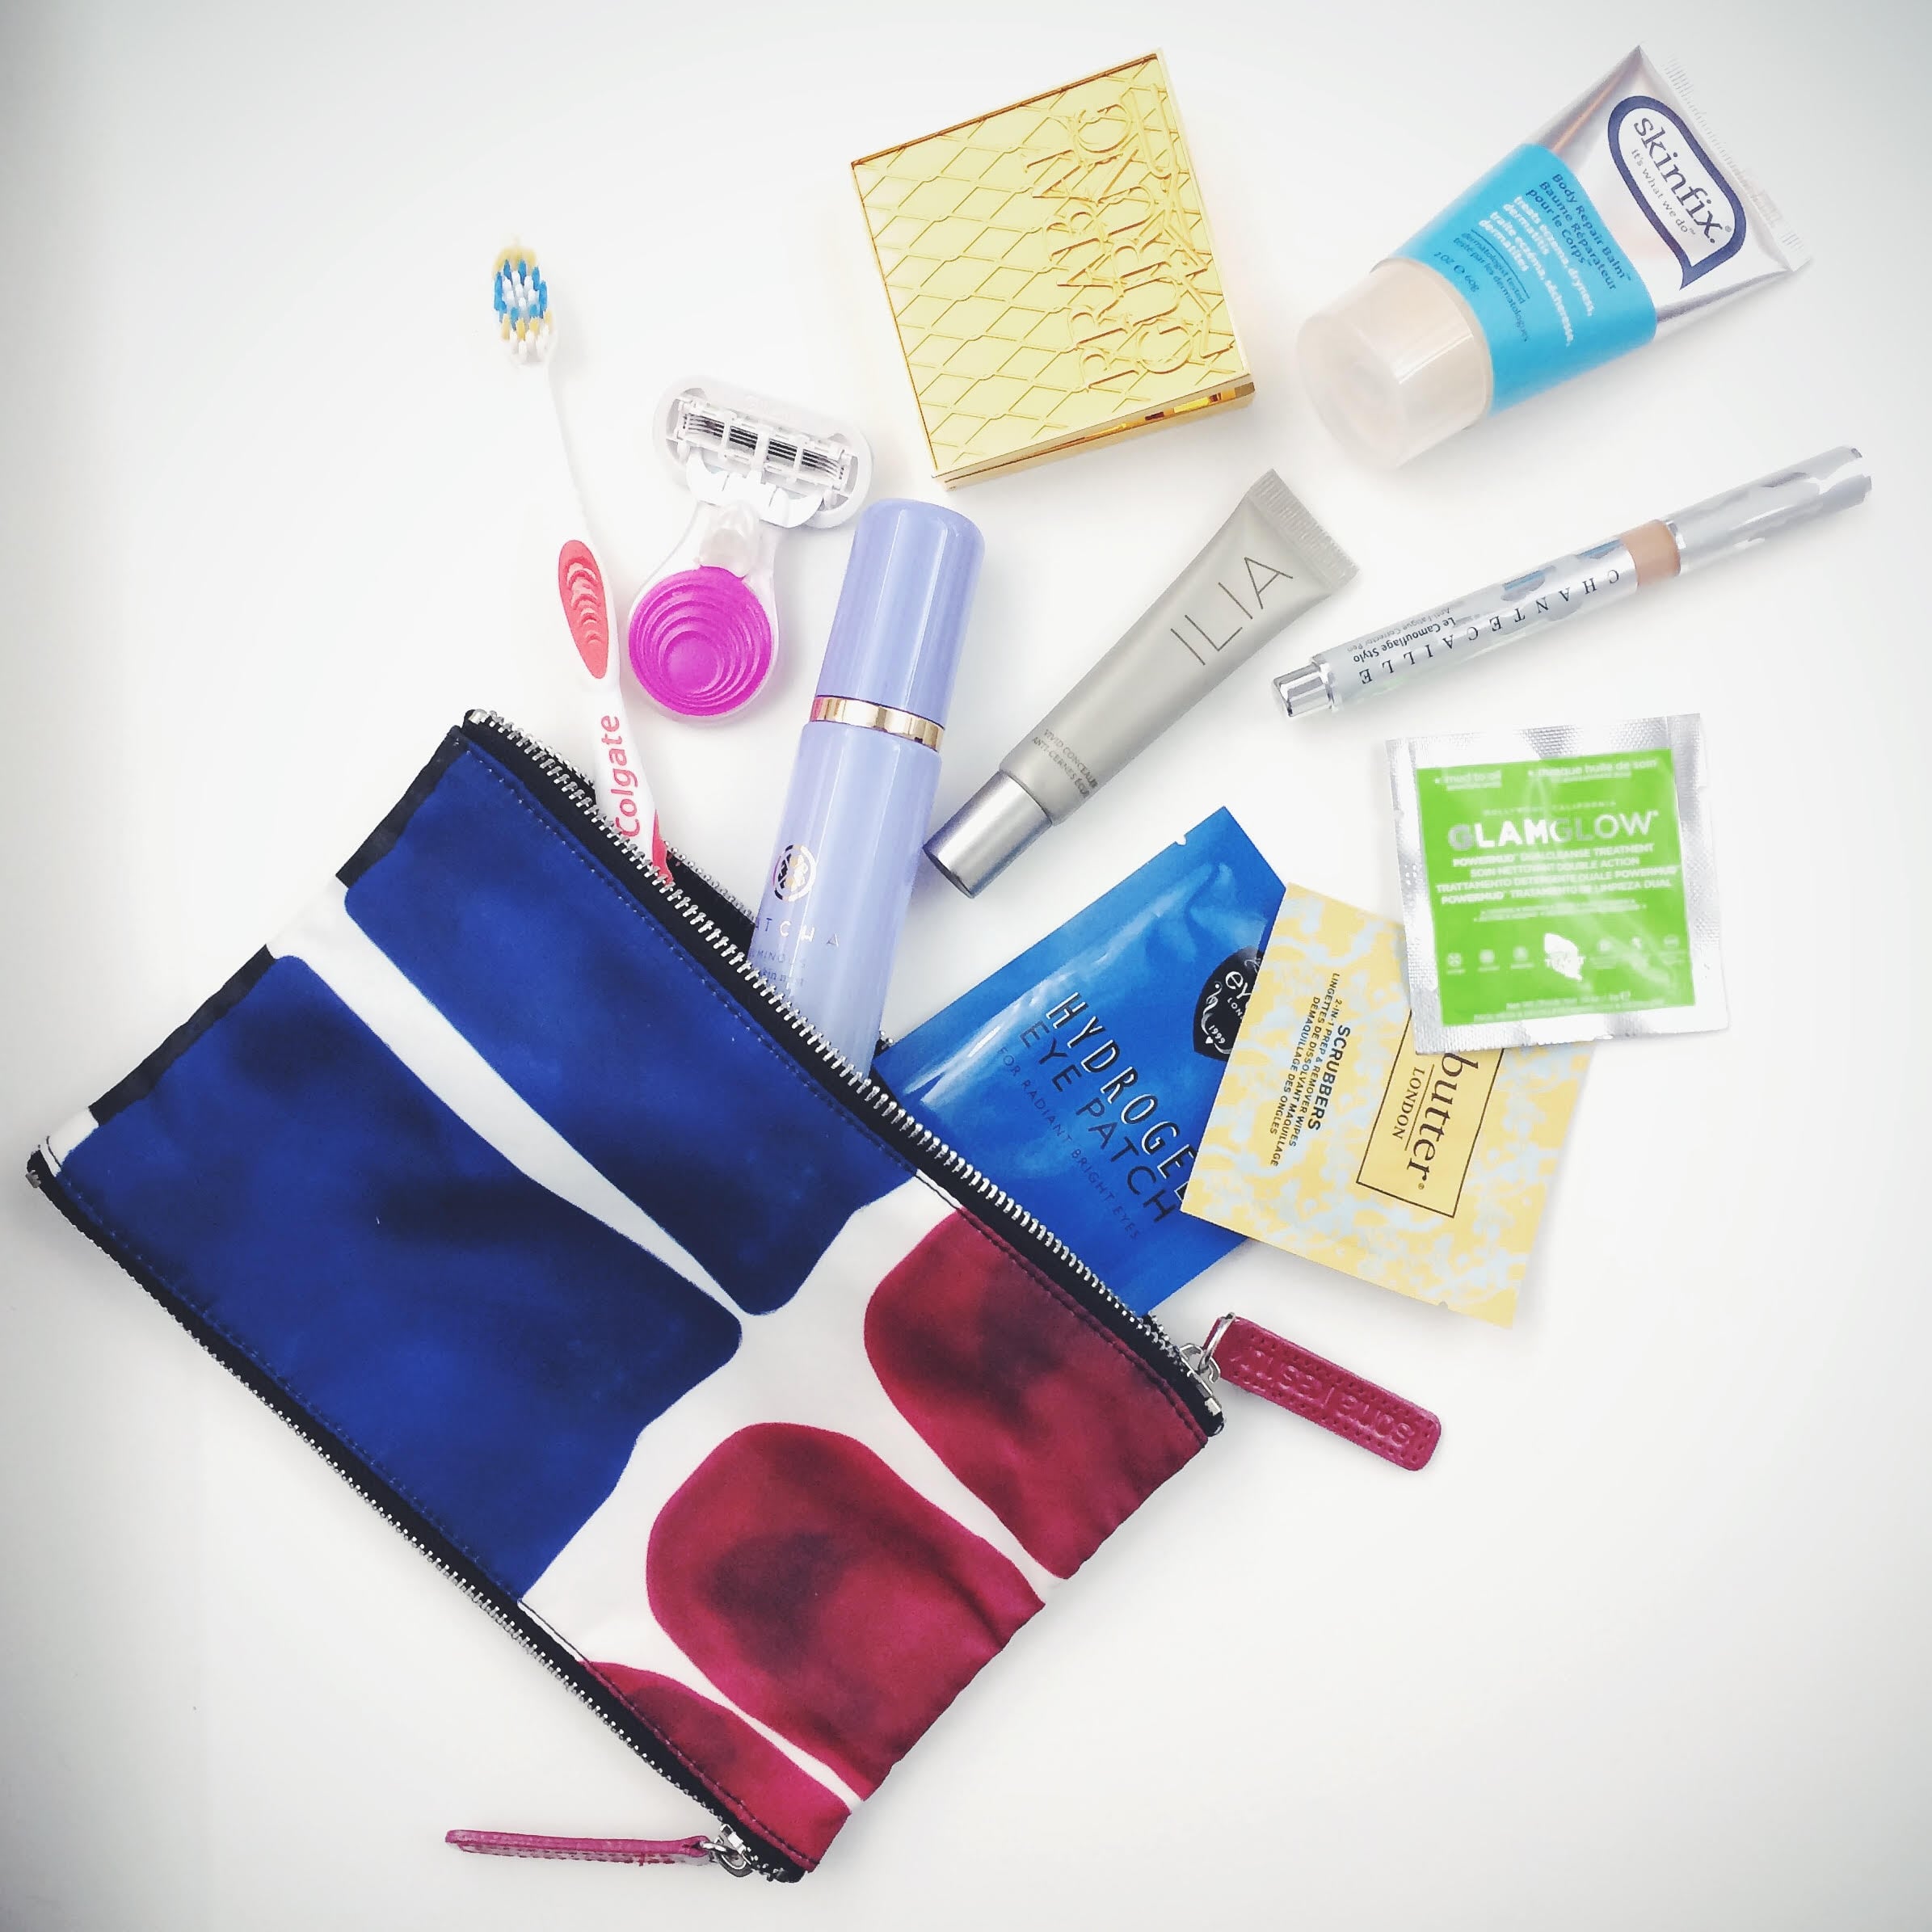 Checklist and tips: travel beauty essentials to pack for your next holiday  - Styling You